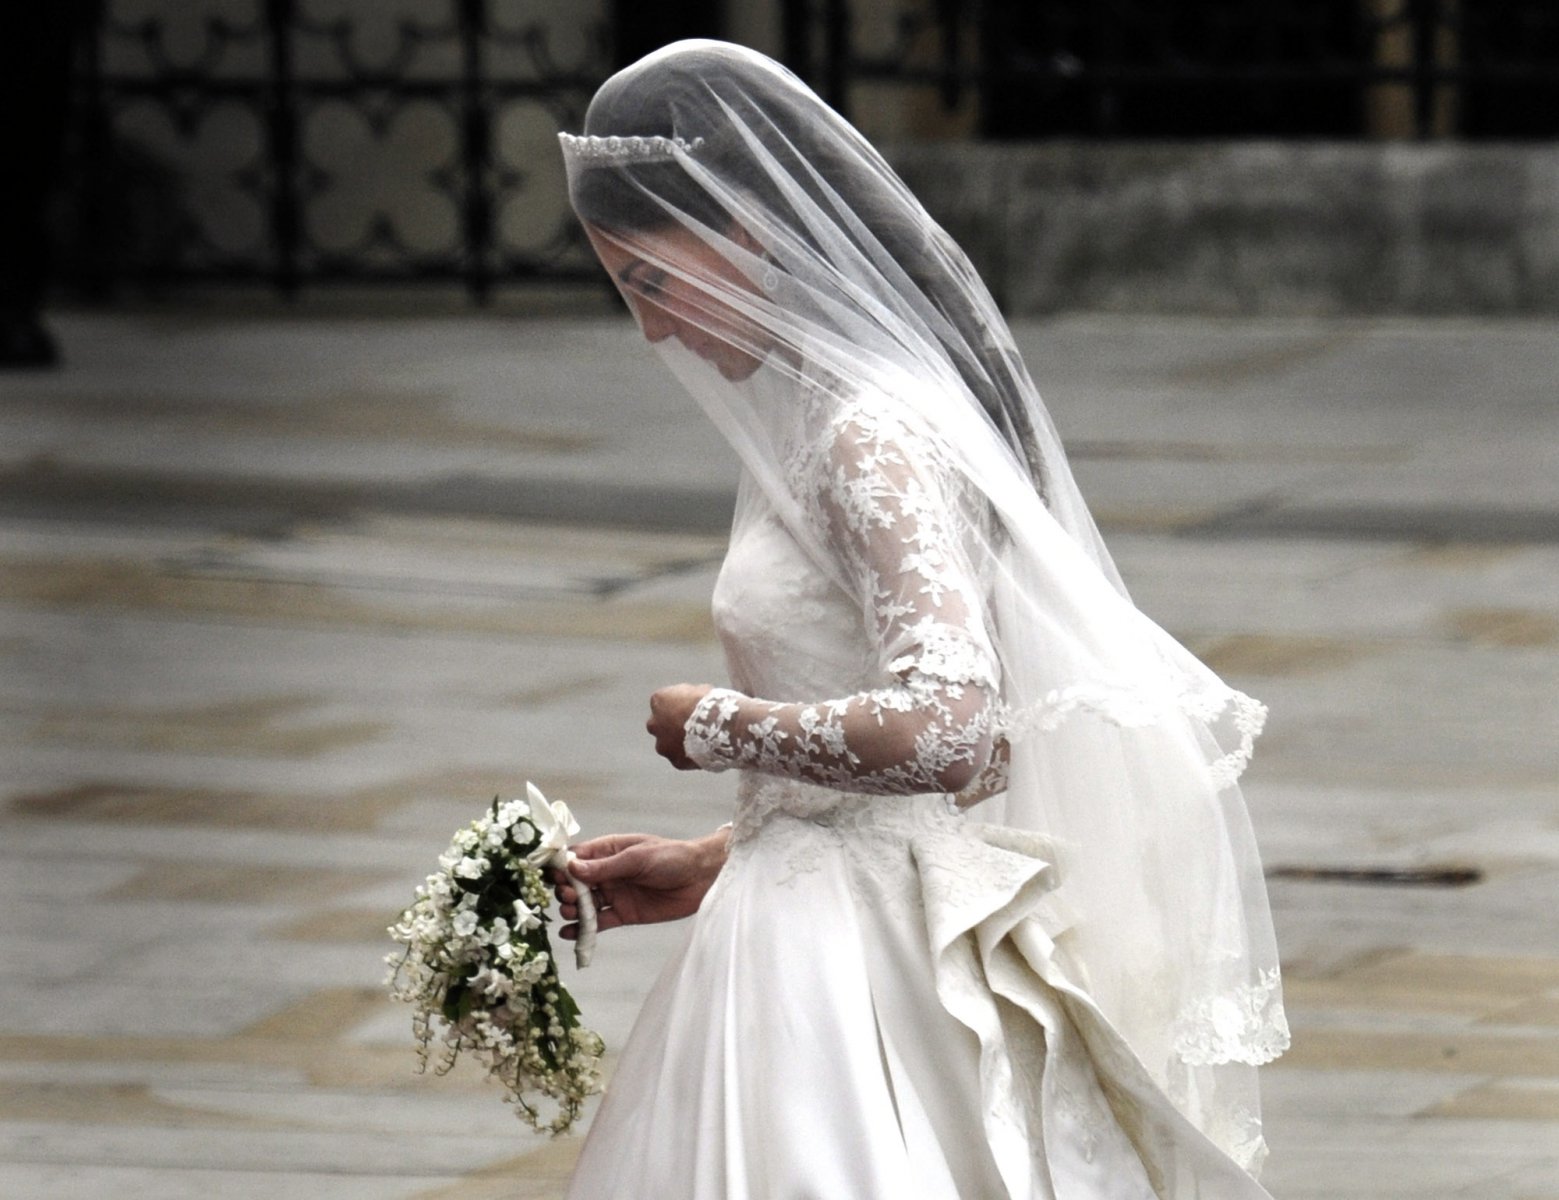 The bride Kate Middleton arrives at Westminster Abbey for her wedding ceremony with Prince William in London, Britain, 29 April 2011. Photo: Boris Roessler/dpa